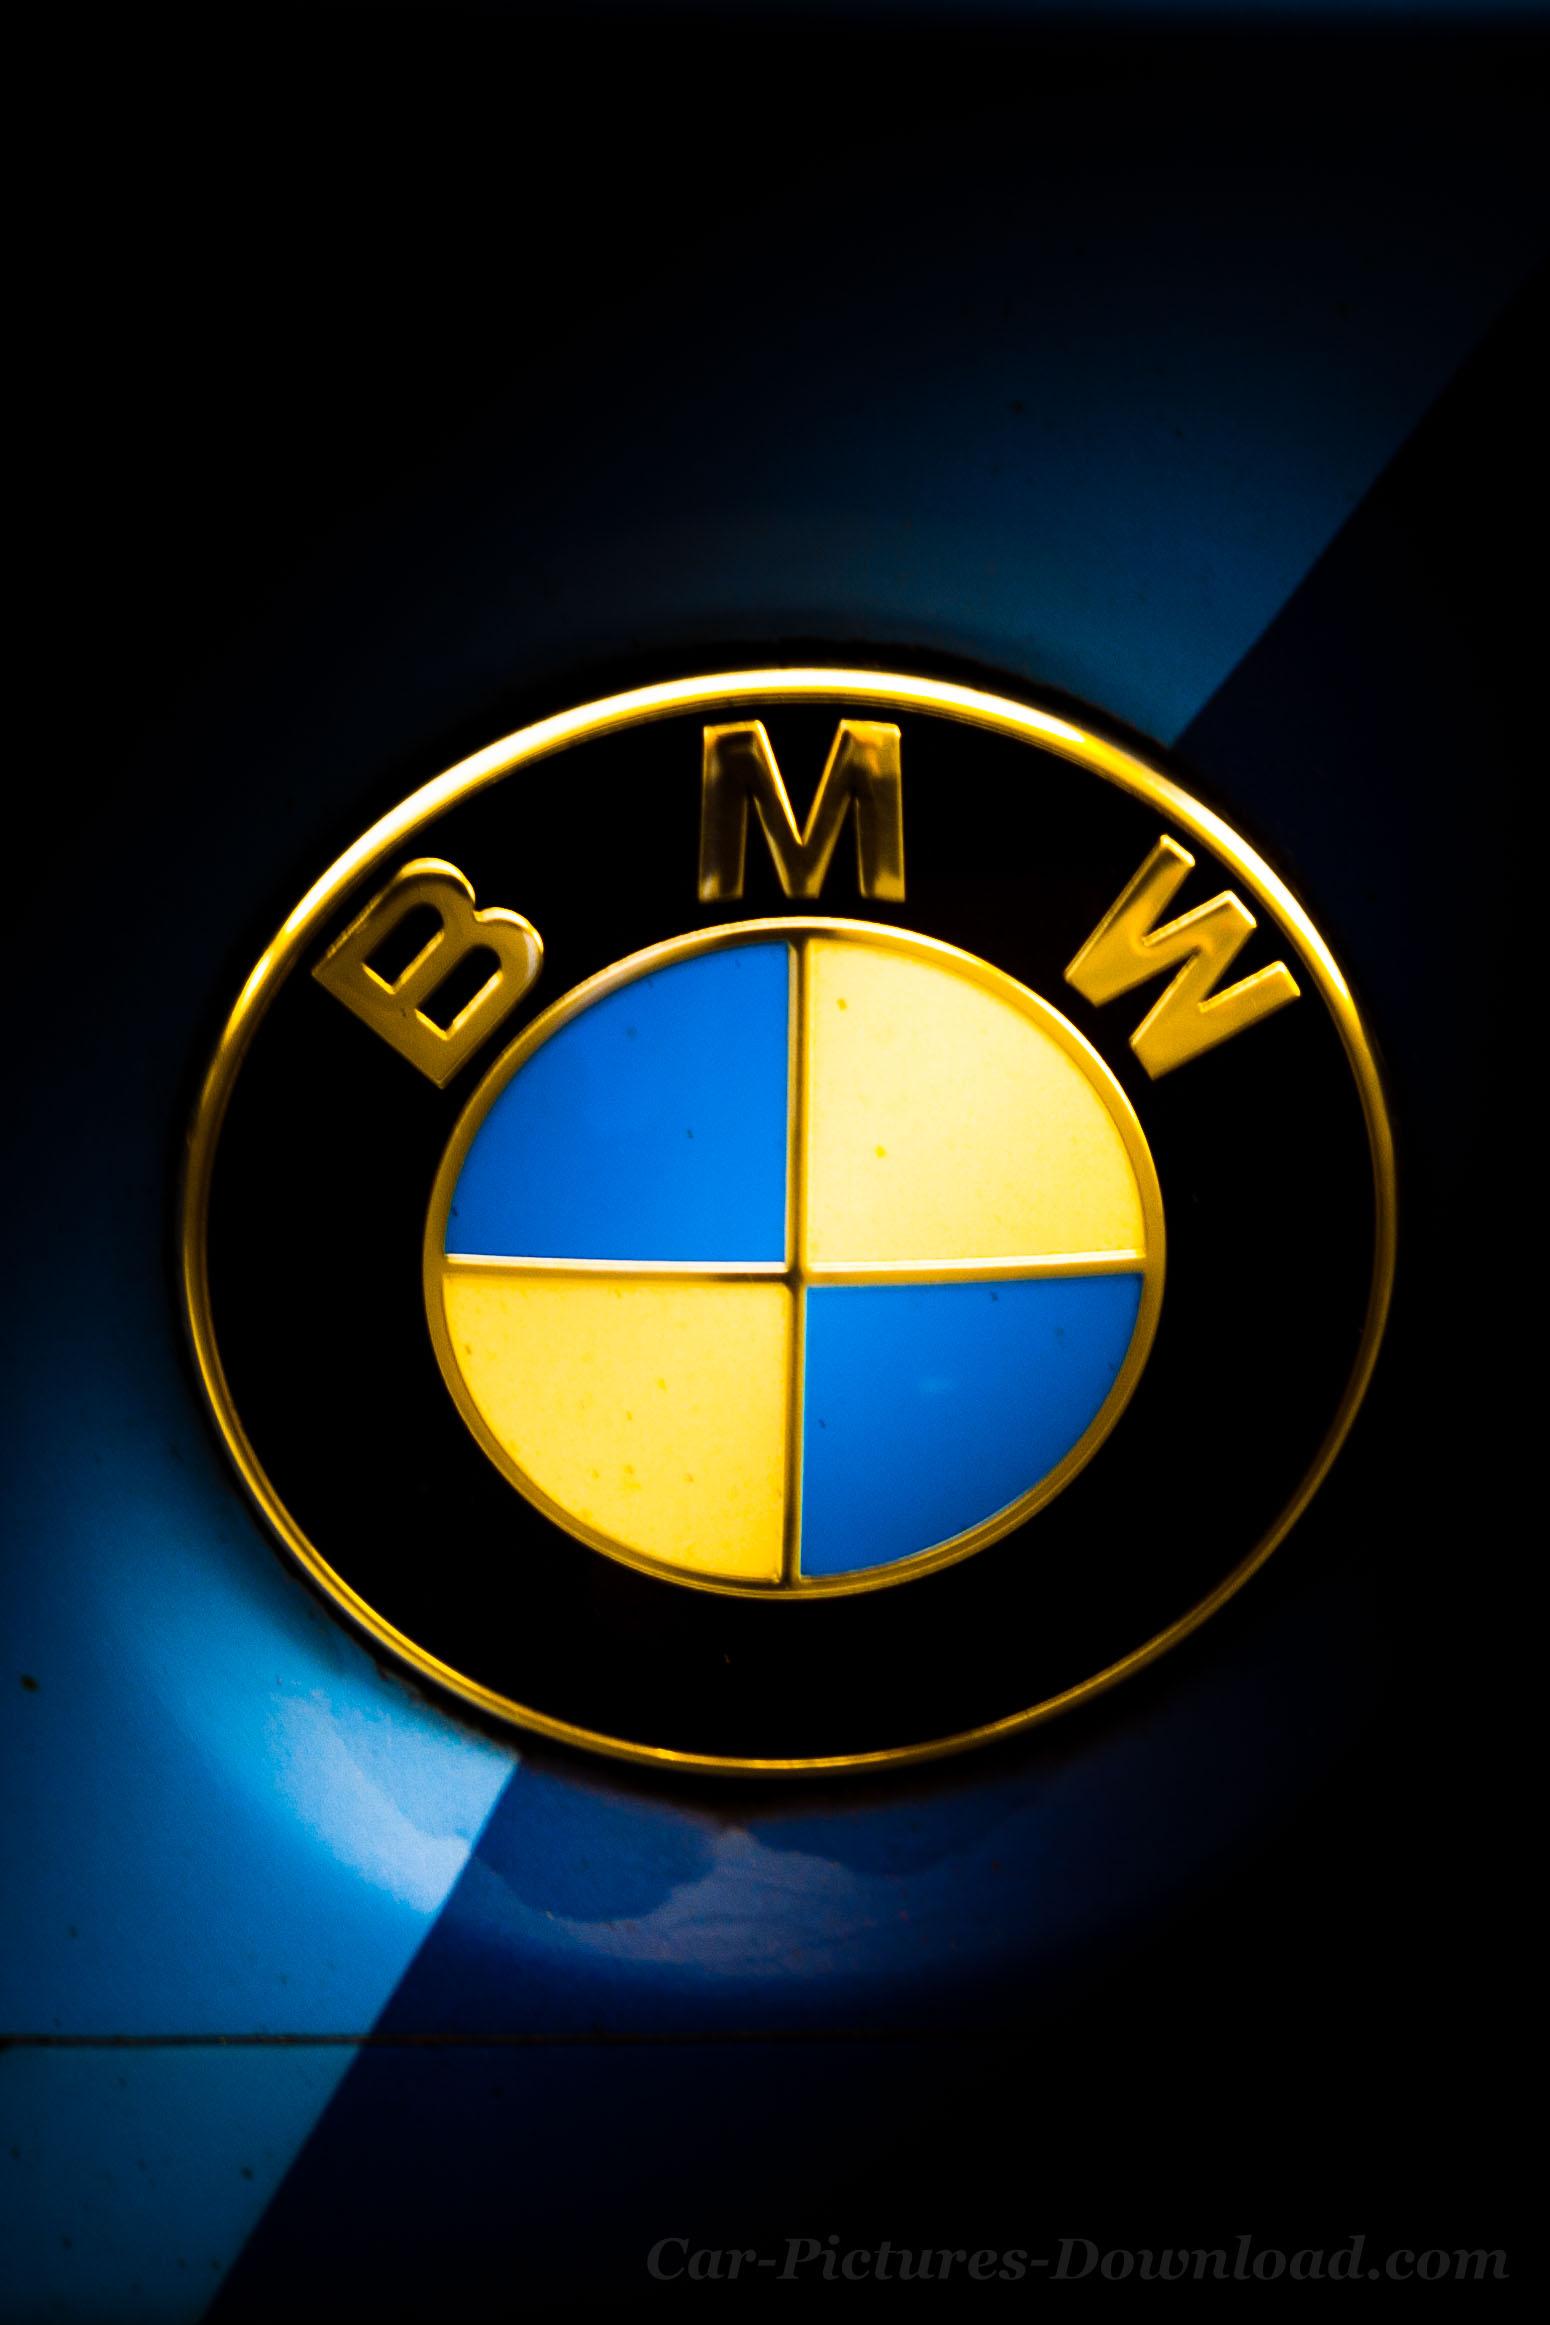 BMW Logo HD Mobile Wallpapers - Wallpaper Cave